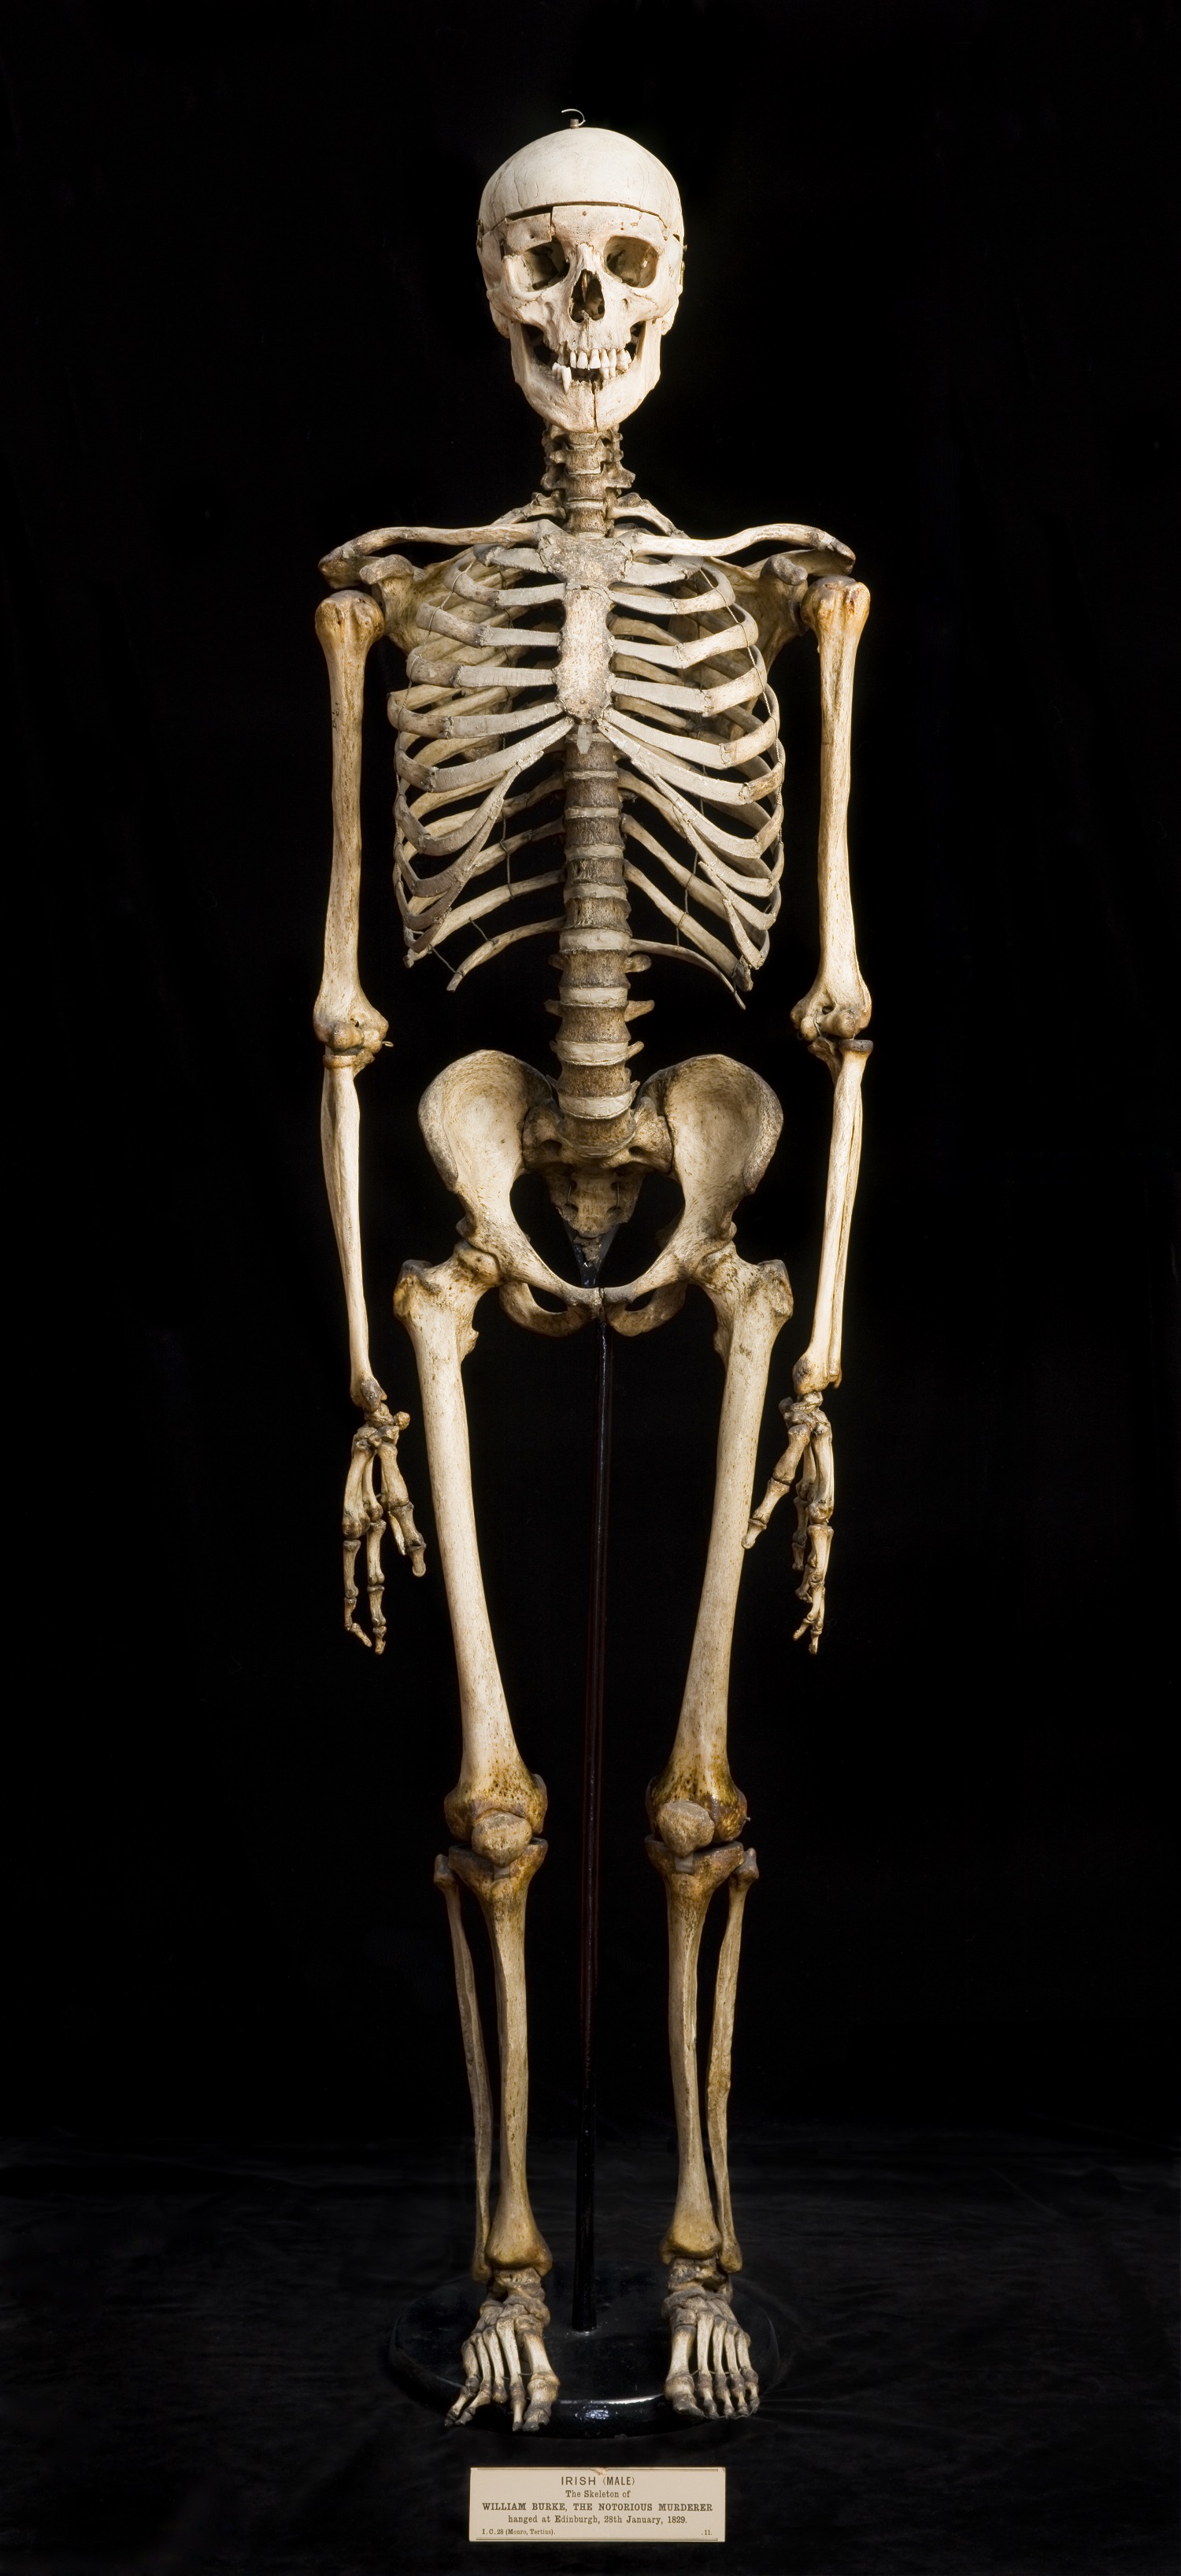 On the orders of the Lord Justice-Clerk, after dissection Burke’s skeleton was preserved, ‘in order that posterity may keep in remembrance of [his] atrocious crimes’. The skeleton can be seen in the Anatomical Museum at the University of Edinburgh. © The Anatomical Museum at the University of Edinburgh.